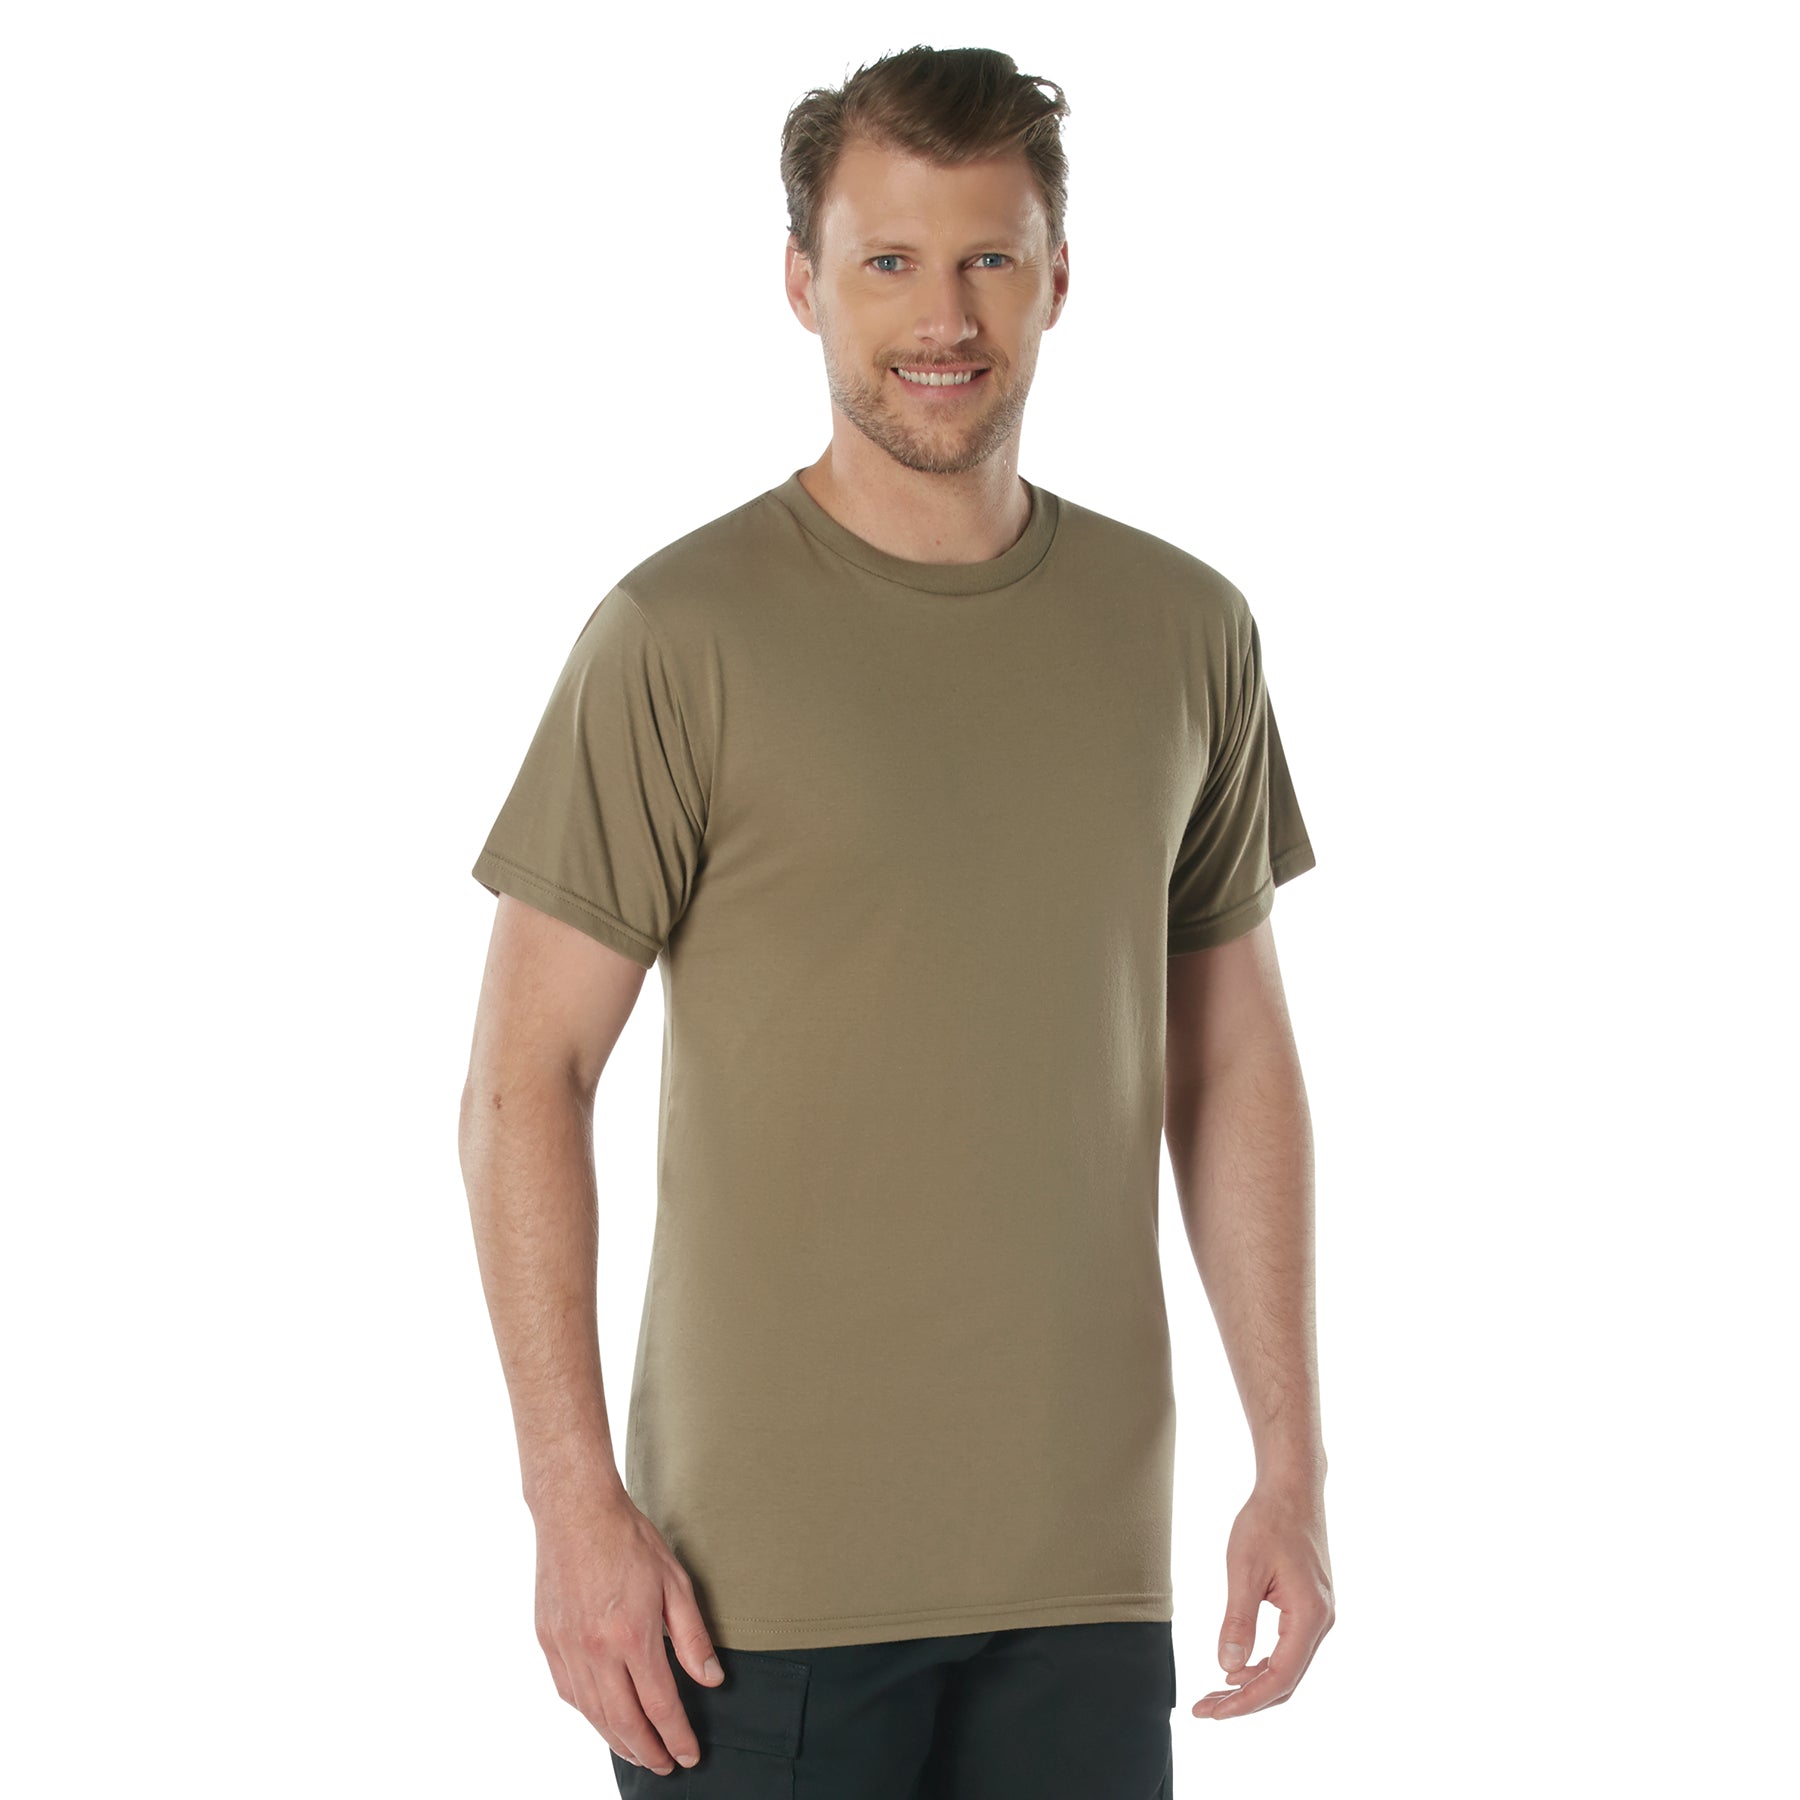 [AR 670-1][Military] Poly/Cotton T-Shirts Coyote Brown AR 670-1